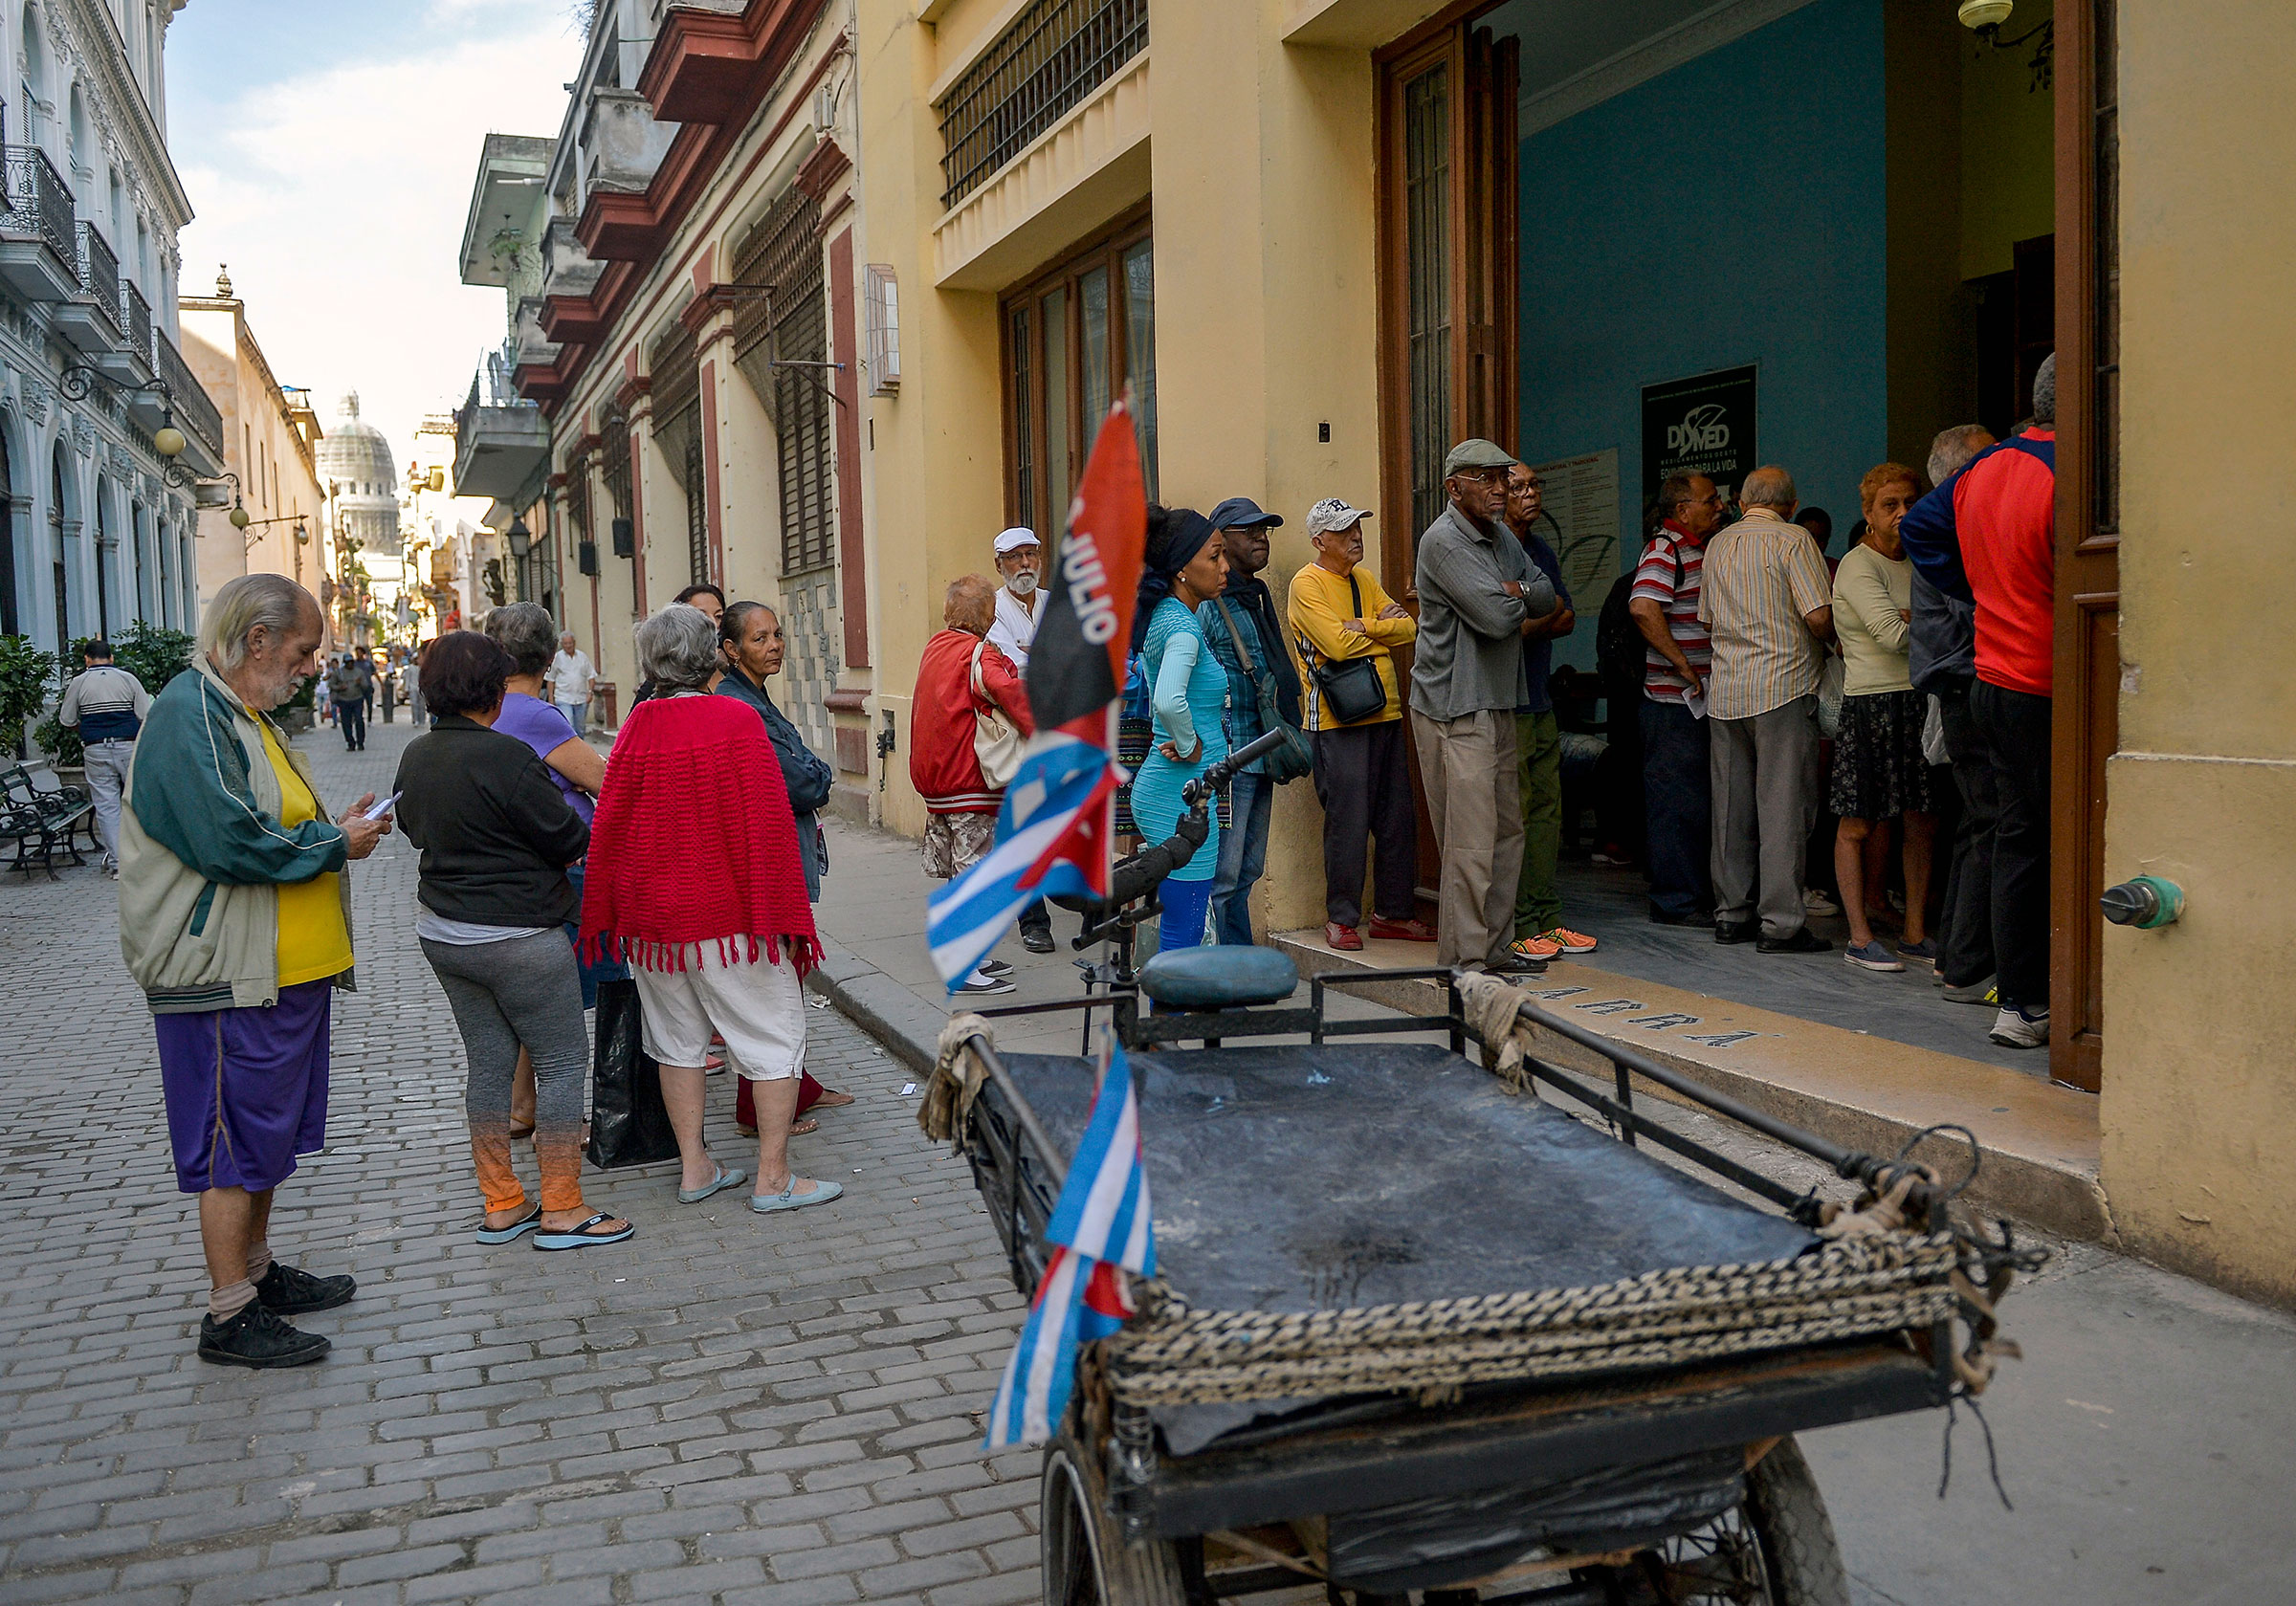 Cubans line up to buy food in Havana, on April 4, 2019. (Yamil Lage—AFP/Getty Images)